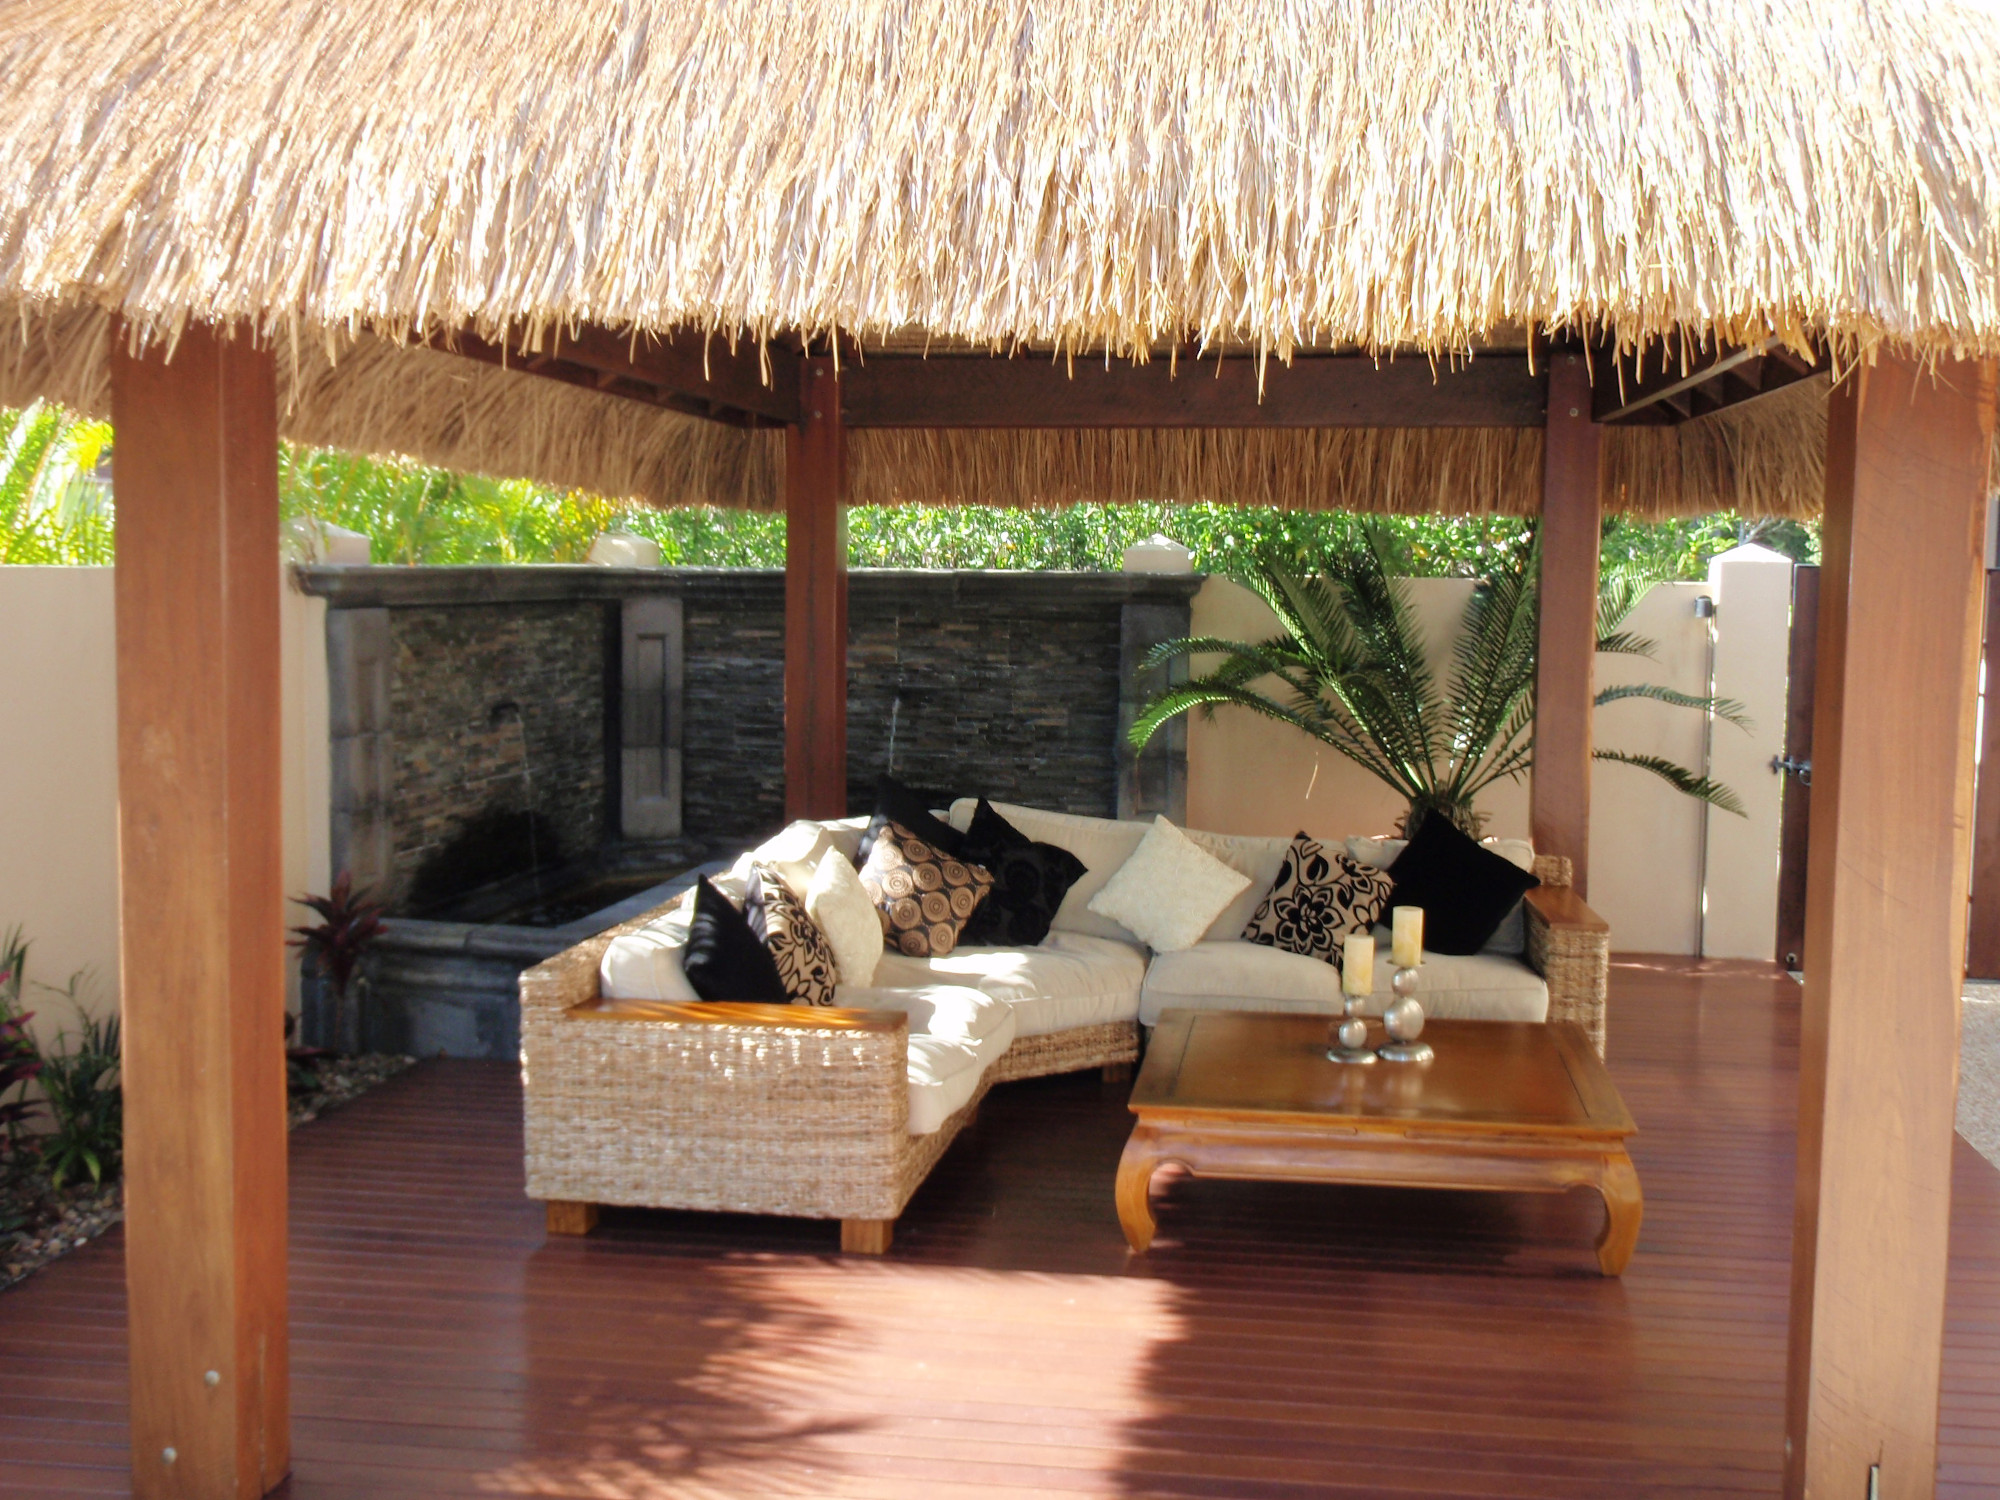 Bali thatched roof over an outdoor seating area